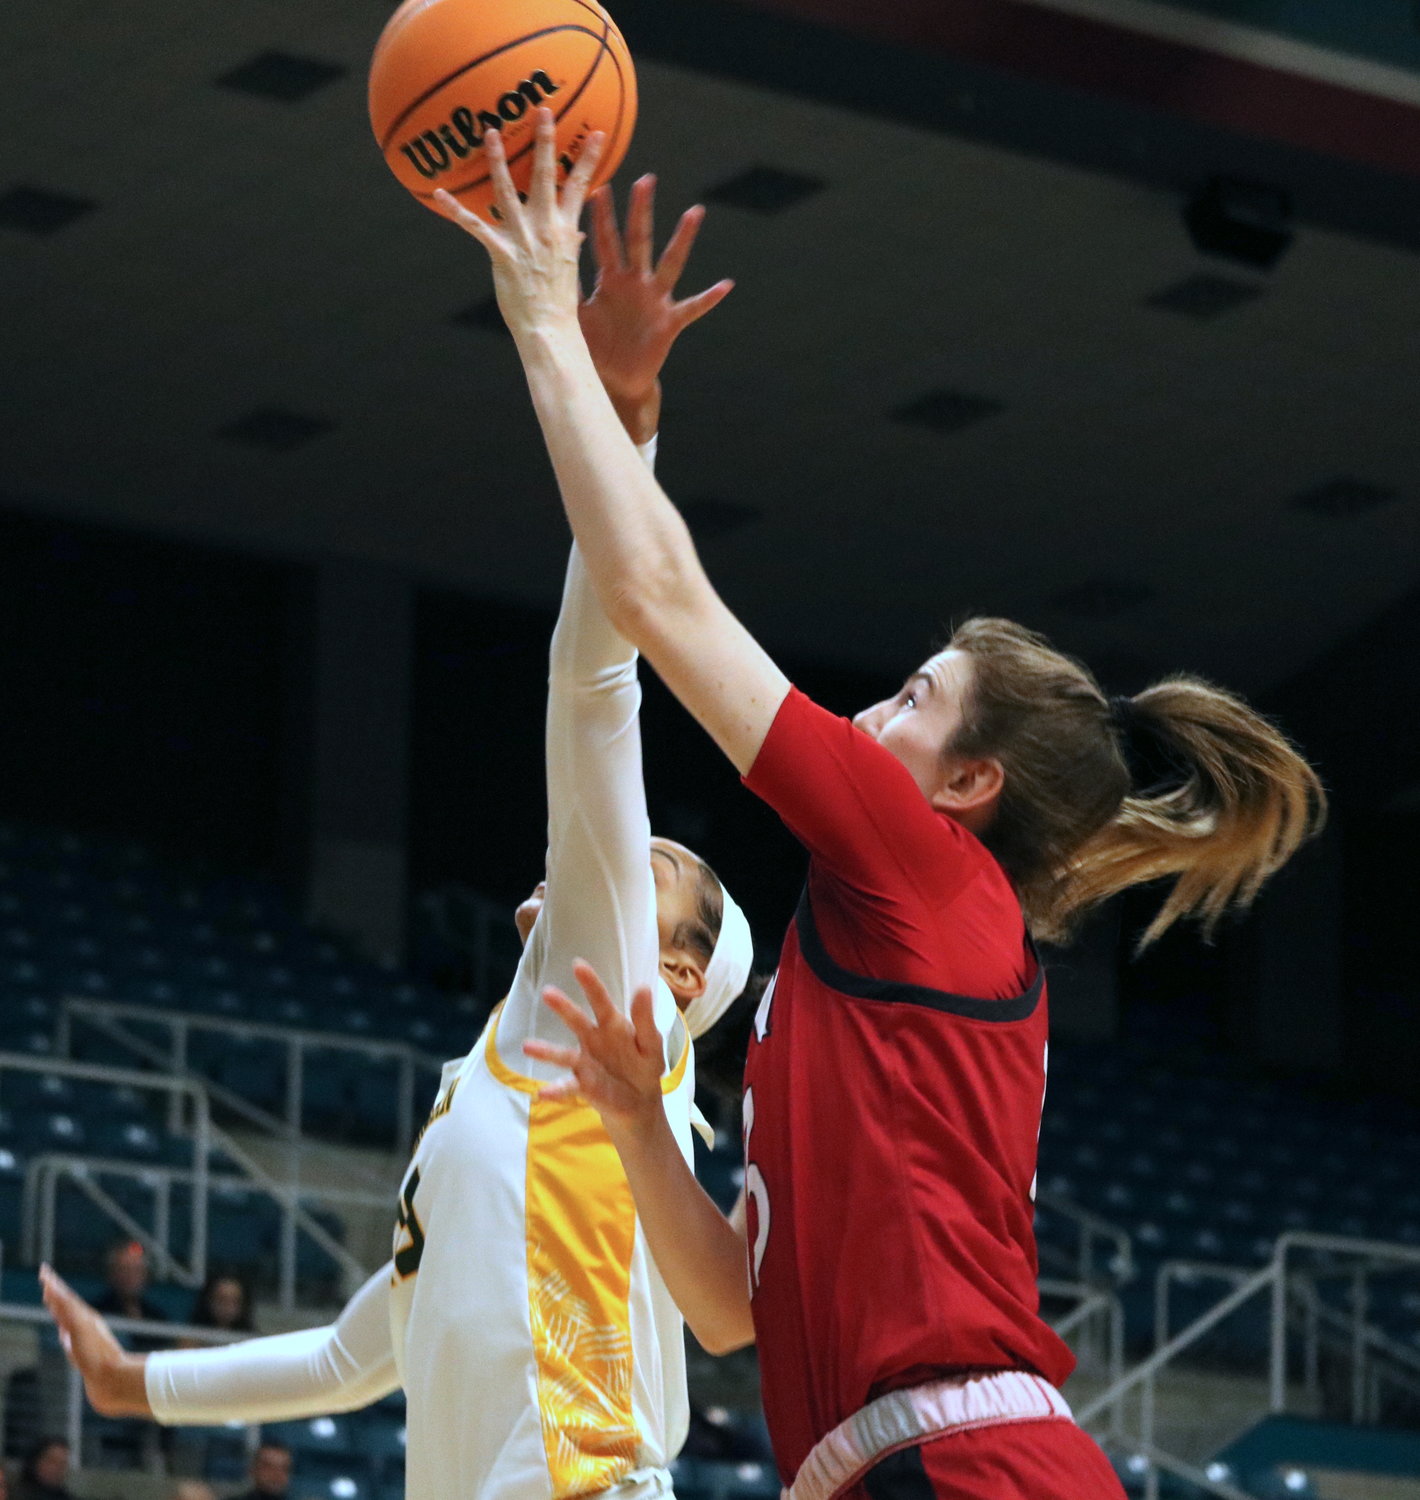 Chloe Storer shoots a layup during Sunday’s Southland Tournament Final at the Merrell Center between the University of Incarnate Word and Southeastern Louisiana.